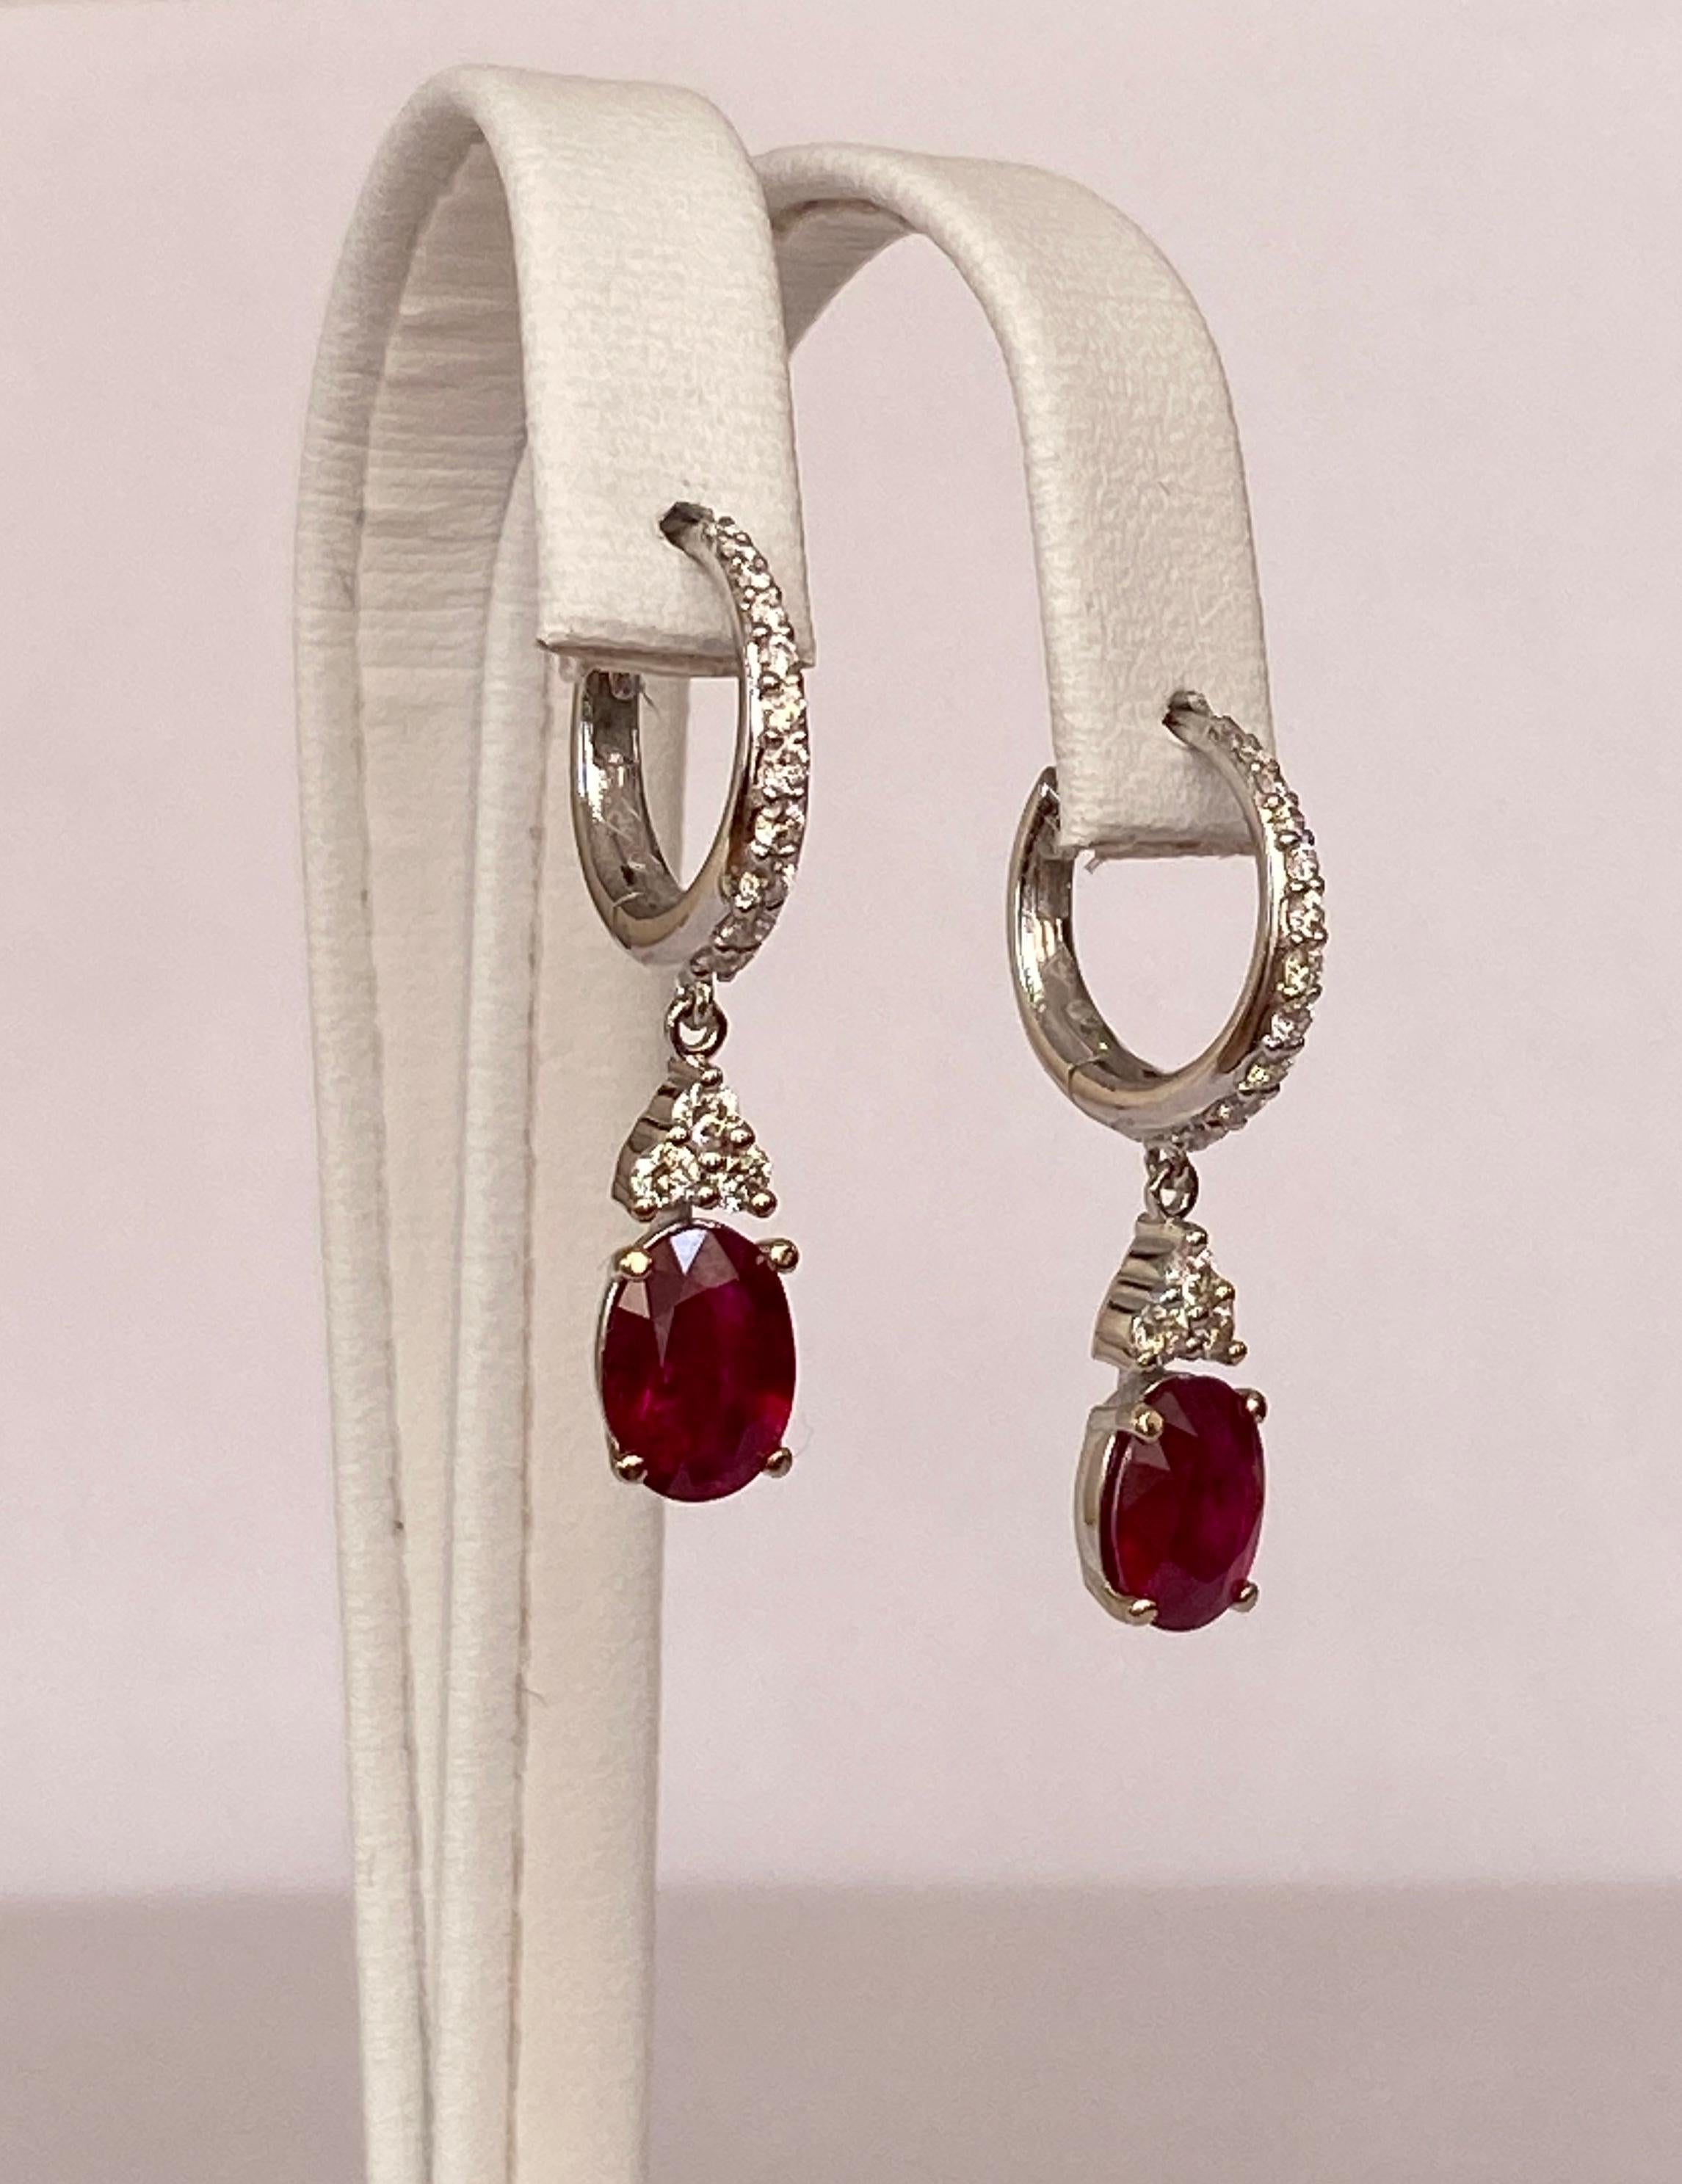 Oval Cut ALGT Certified 18 Kt. White Gold Earrings with 2.28 Ct Rubies and Diamonds For Sale